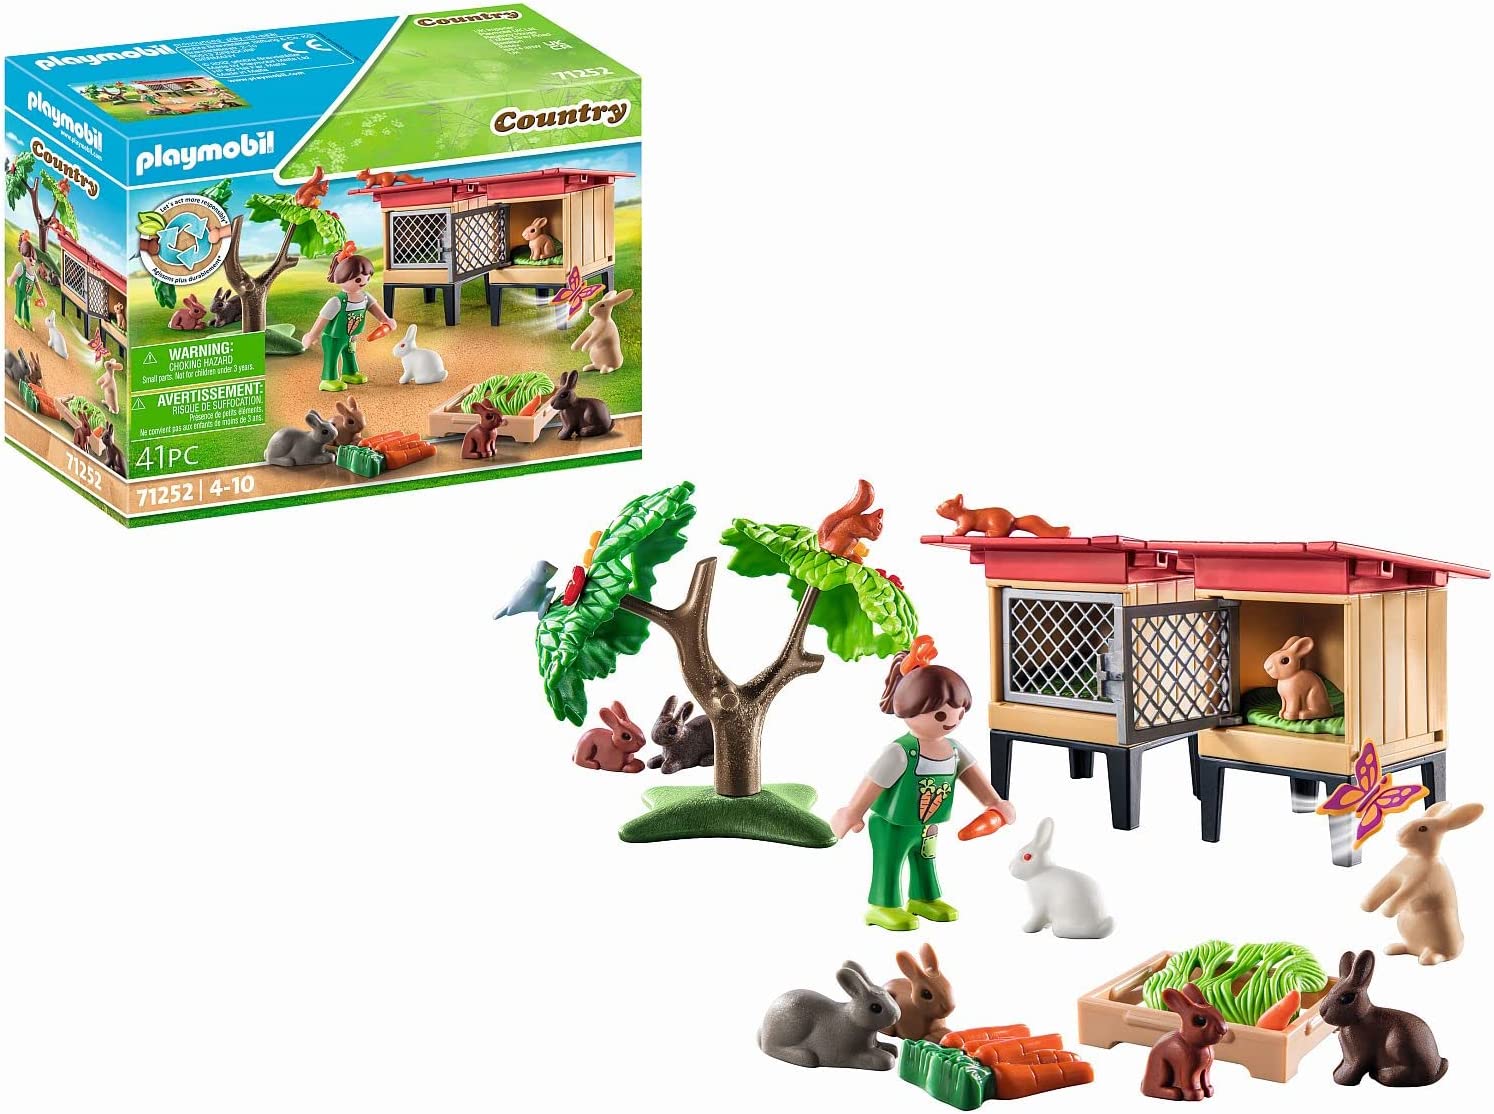 Playmobil Country 71252 Organic Farm Animals Sustainable Toy for Children Aged 4 Years and Up